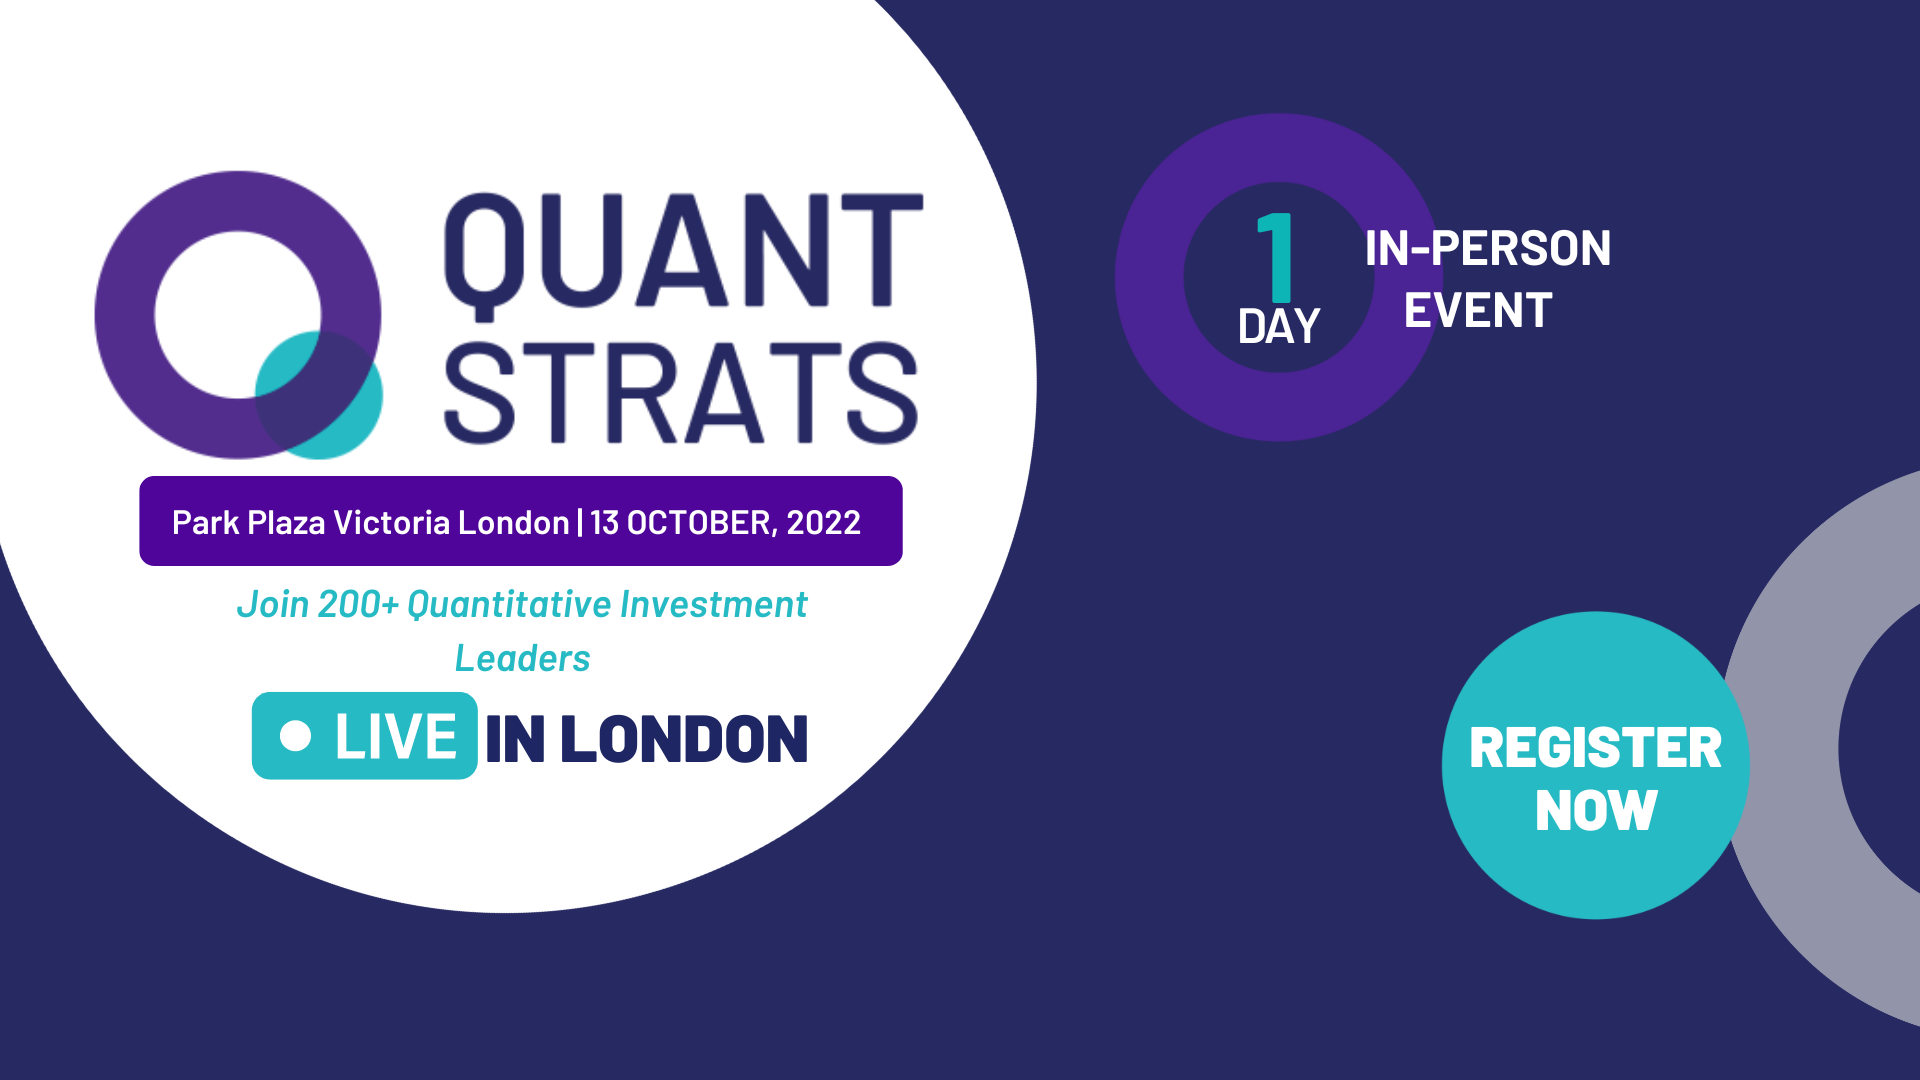 Quant Strats London 2022 organized by Alpha Events